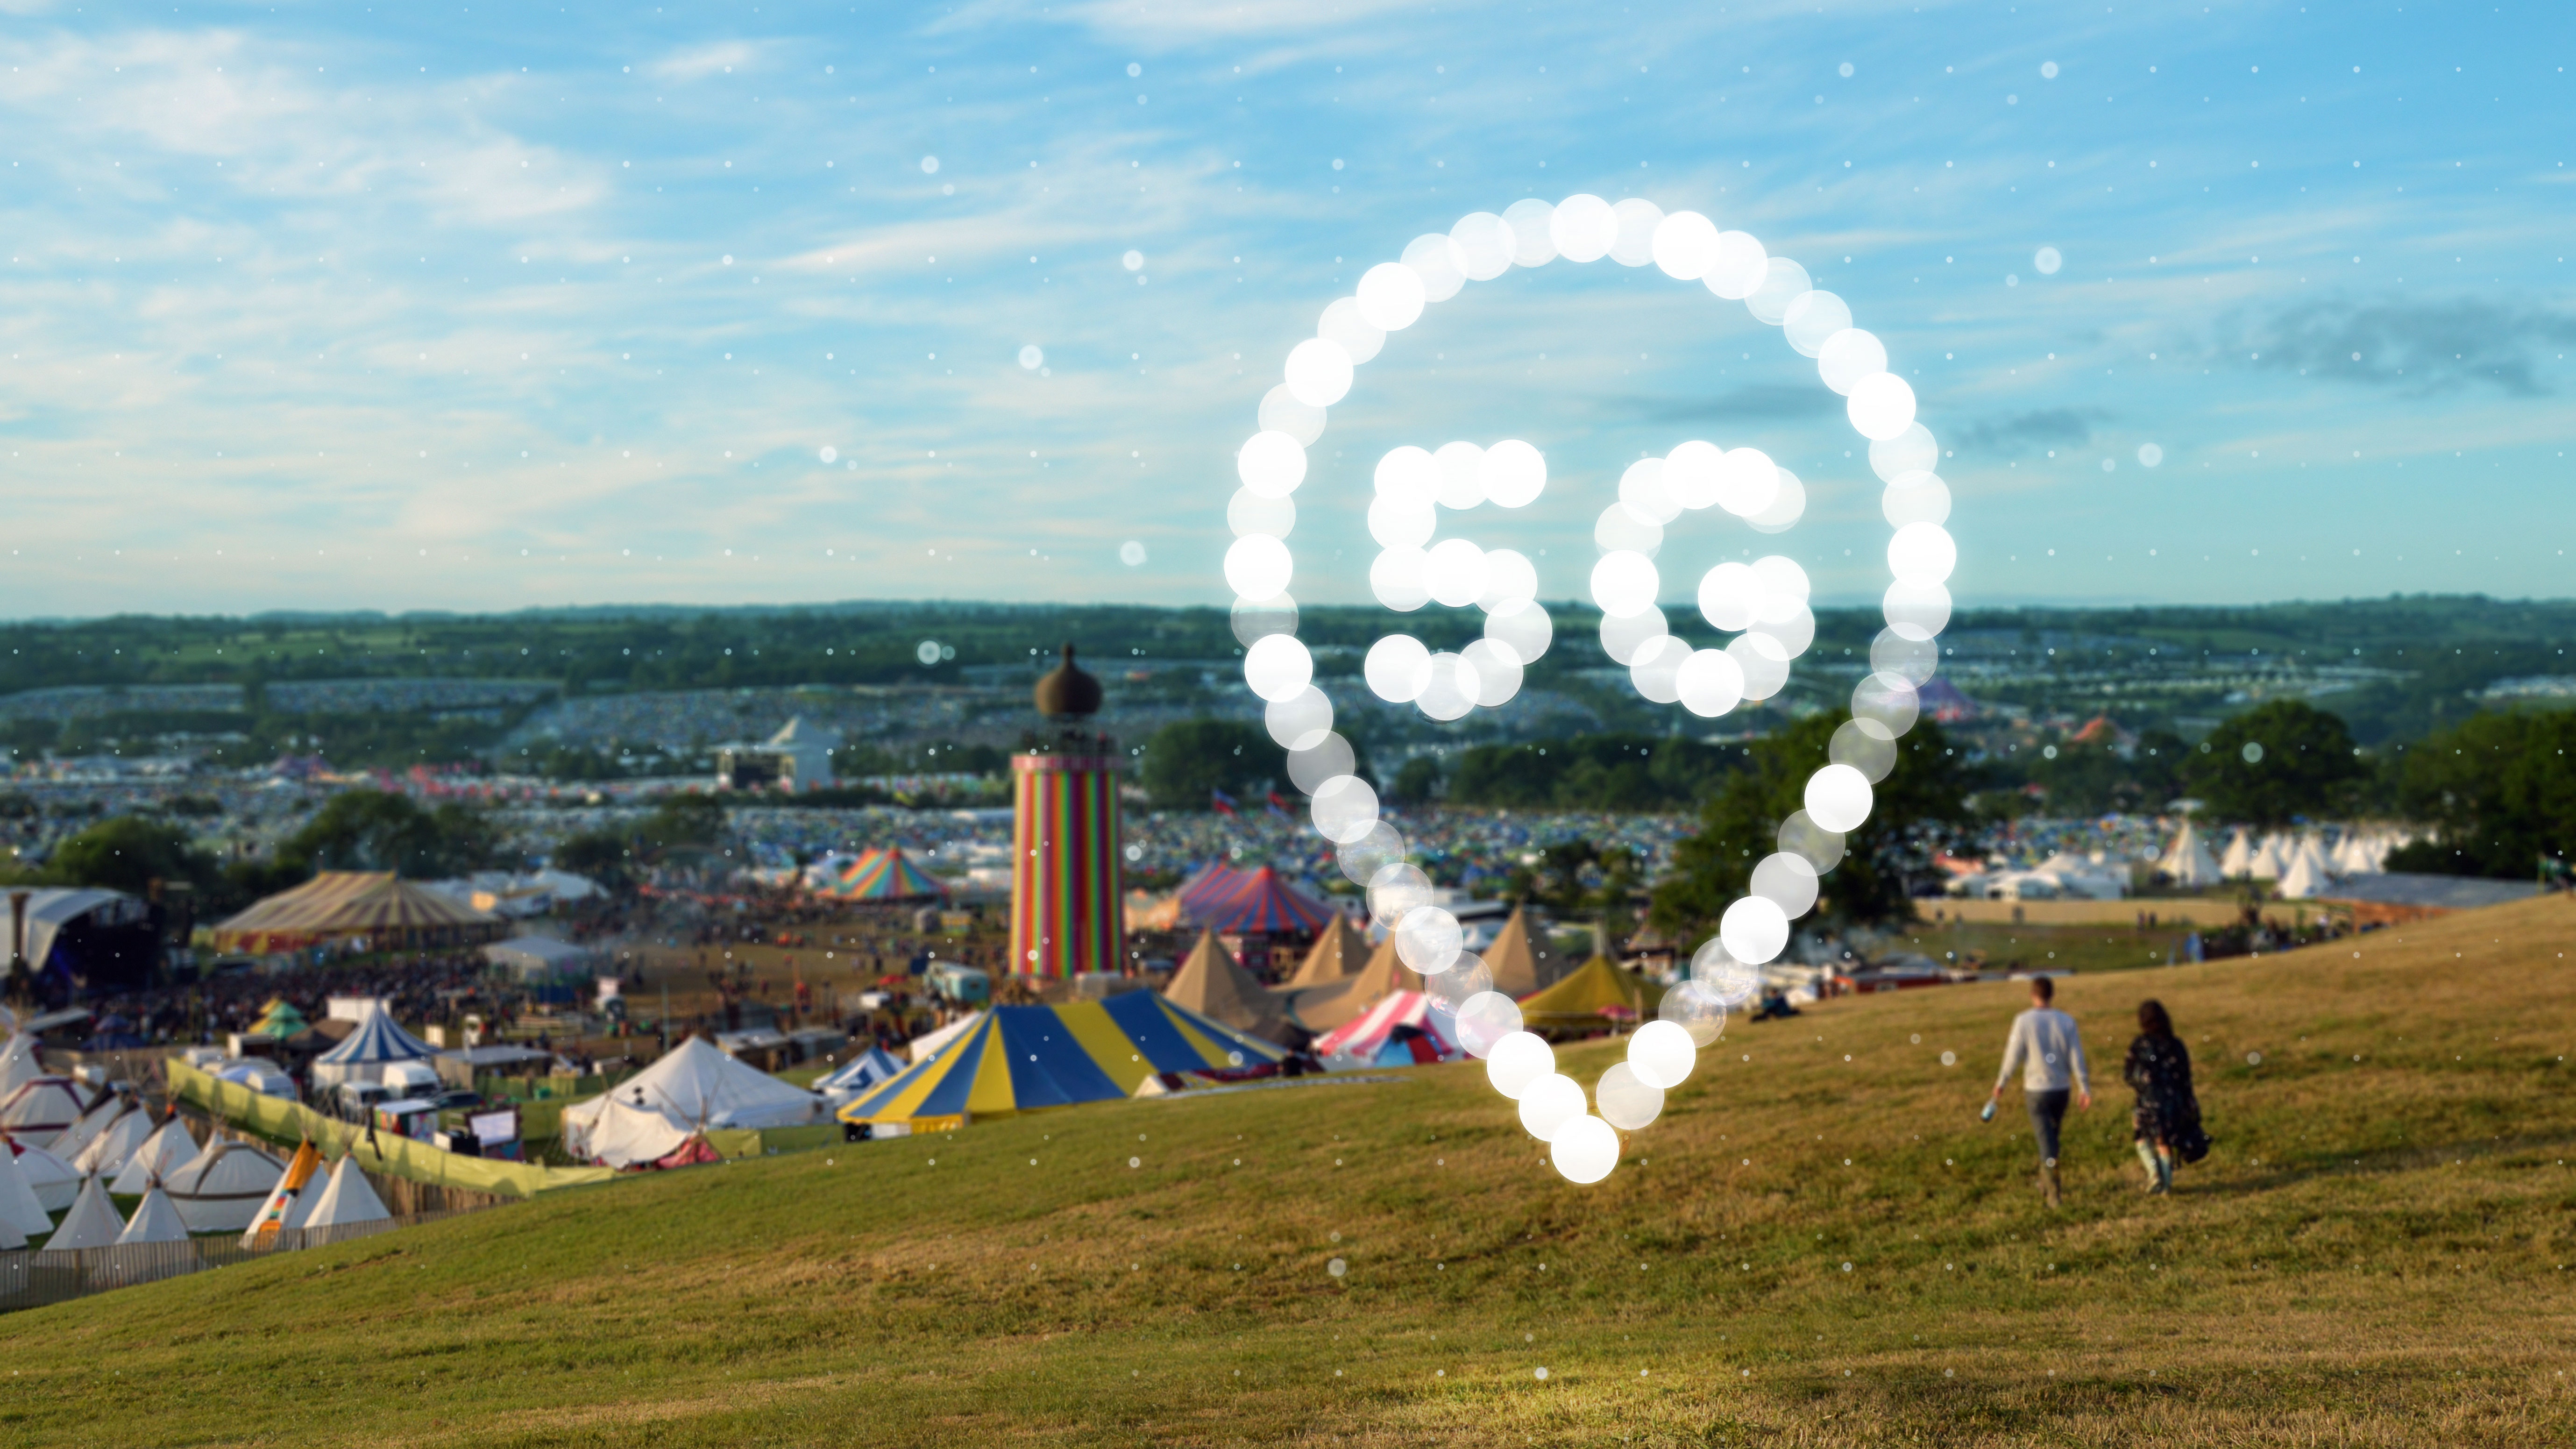 Will 5G solve signal issues at stadiums, festivals and venues? TechRadar